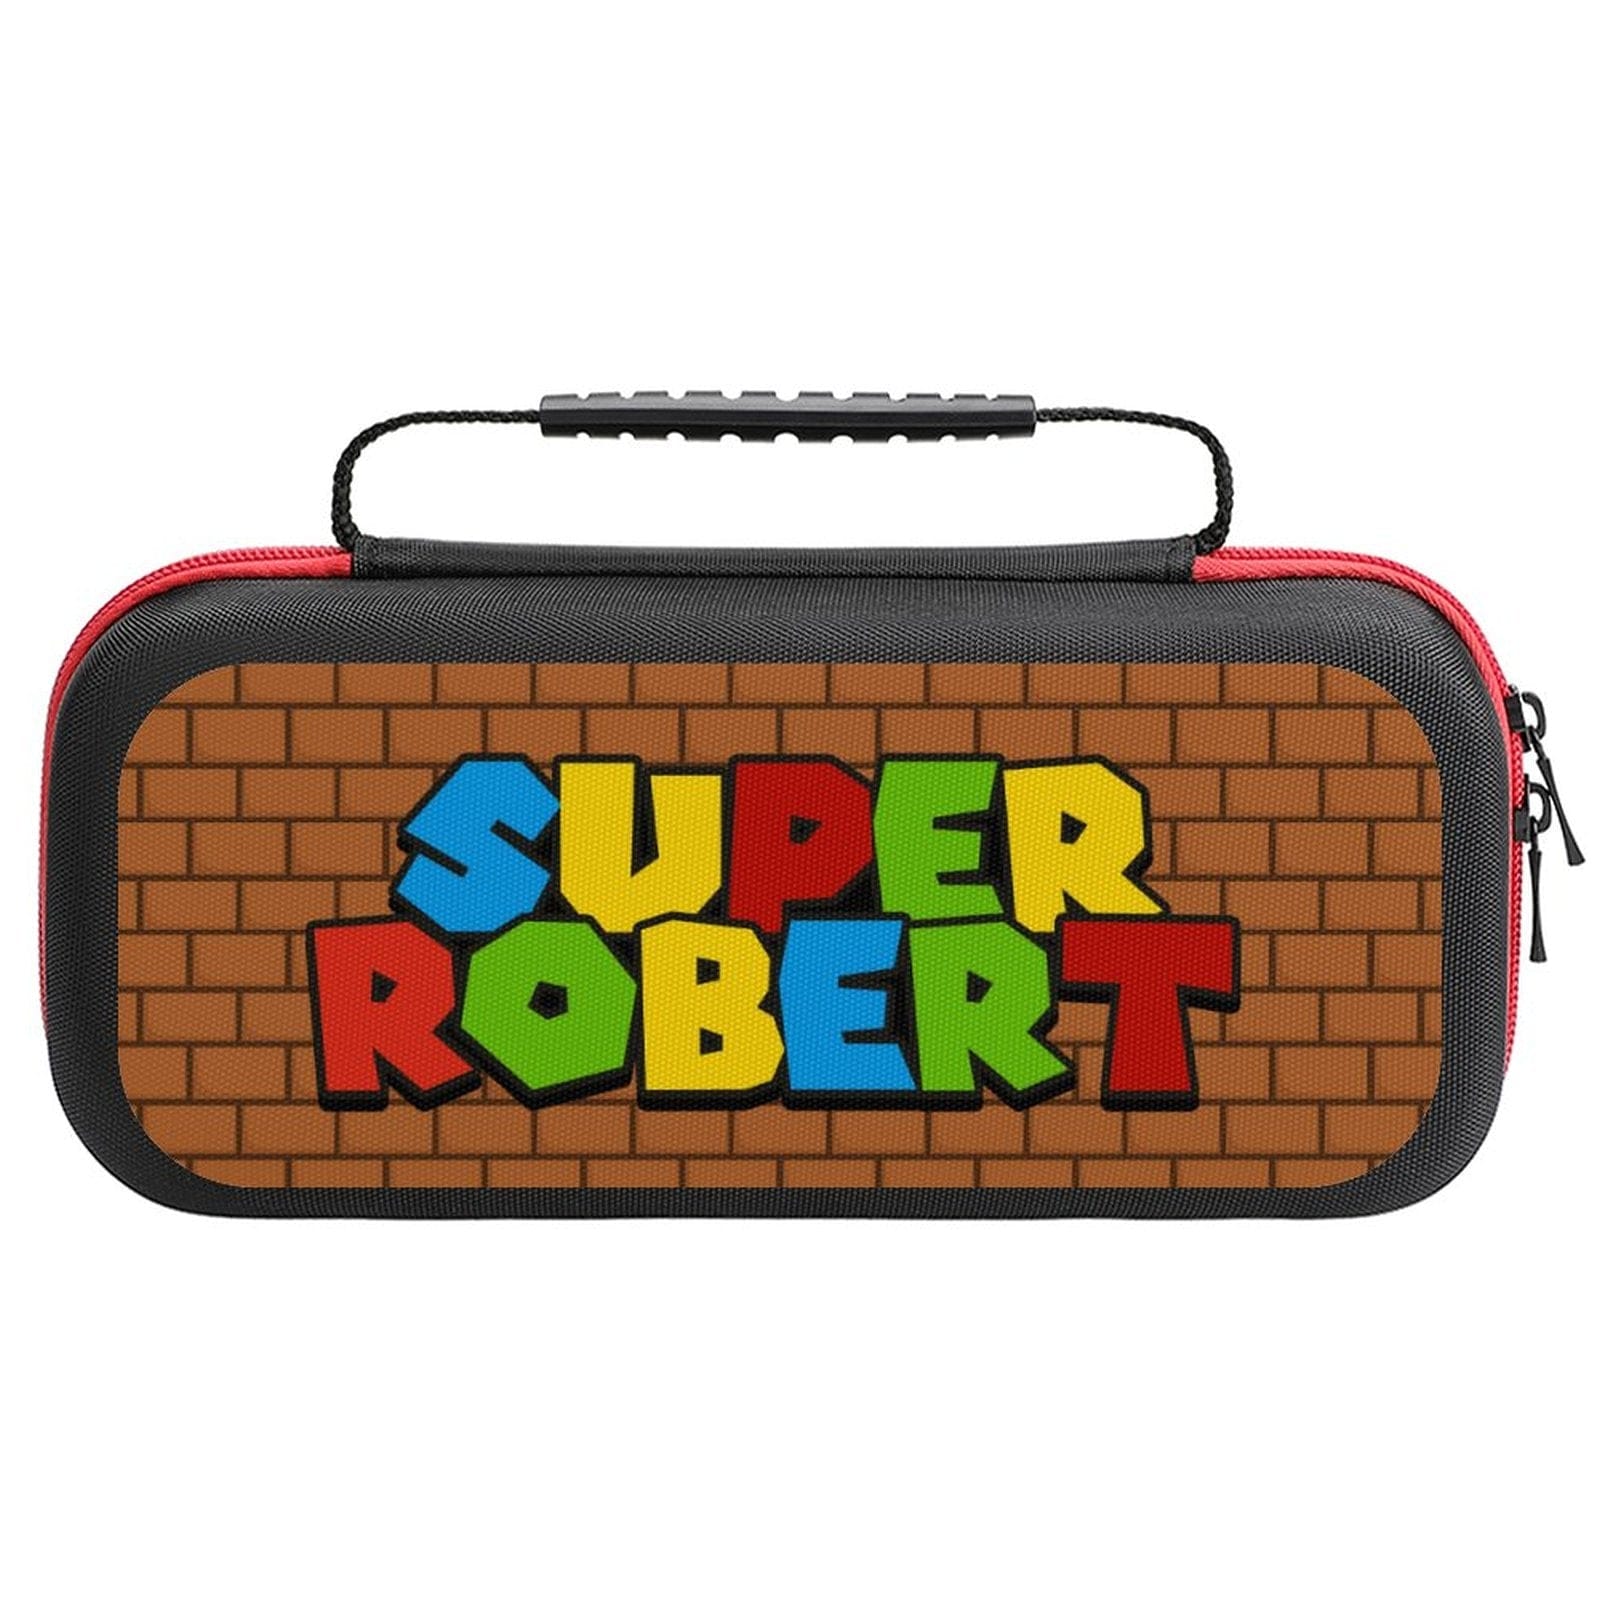 Custom Personalized Name Super Nintendo Switch Case Travel Bag Nintendo Game Carrying Case